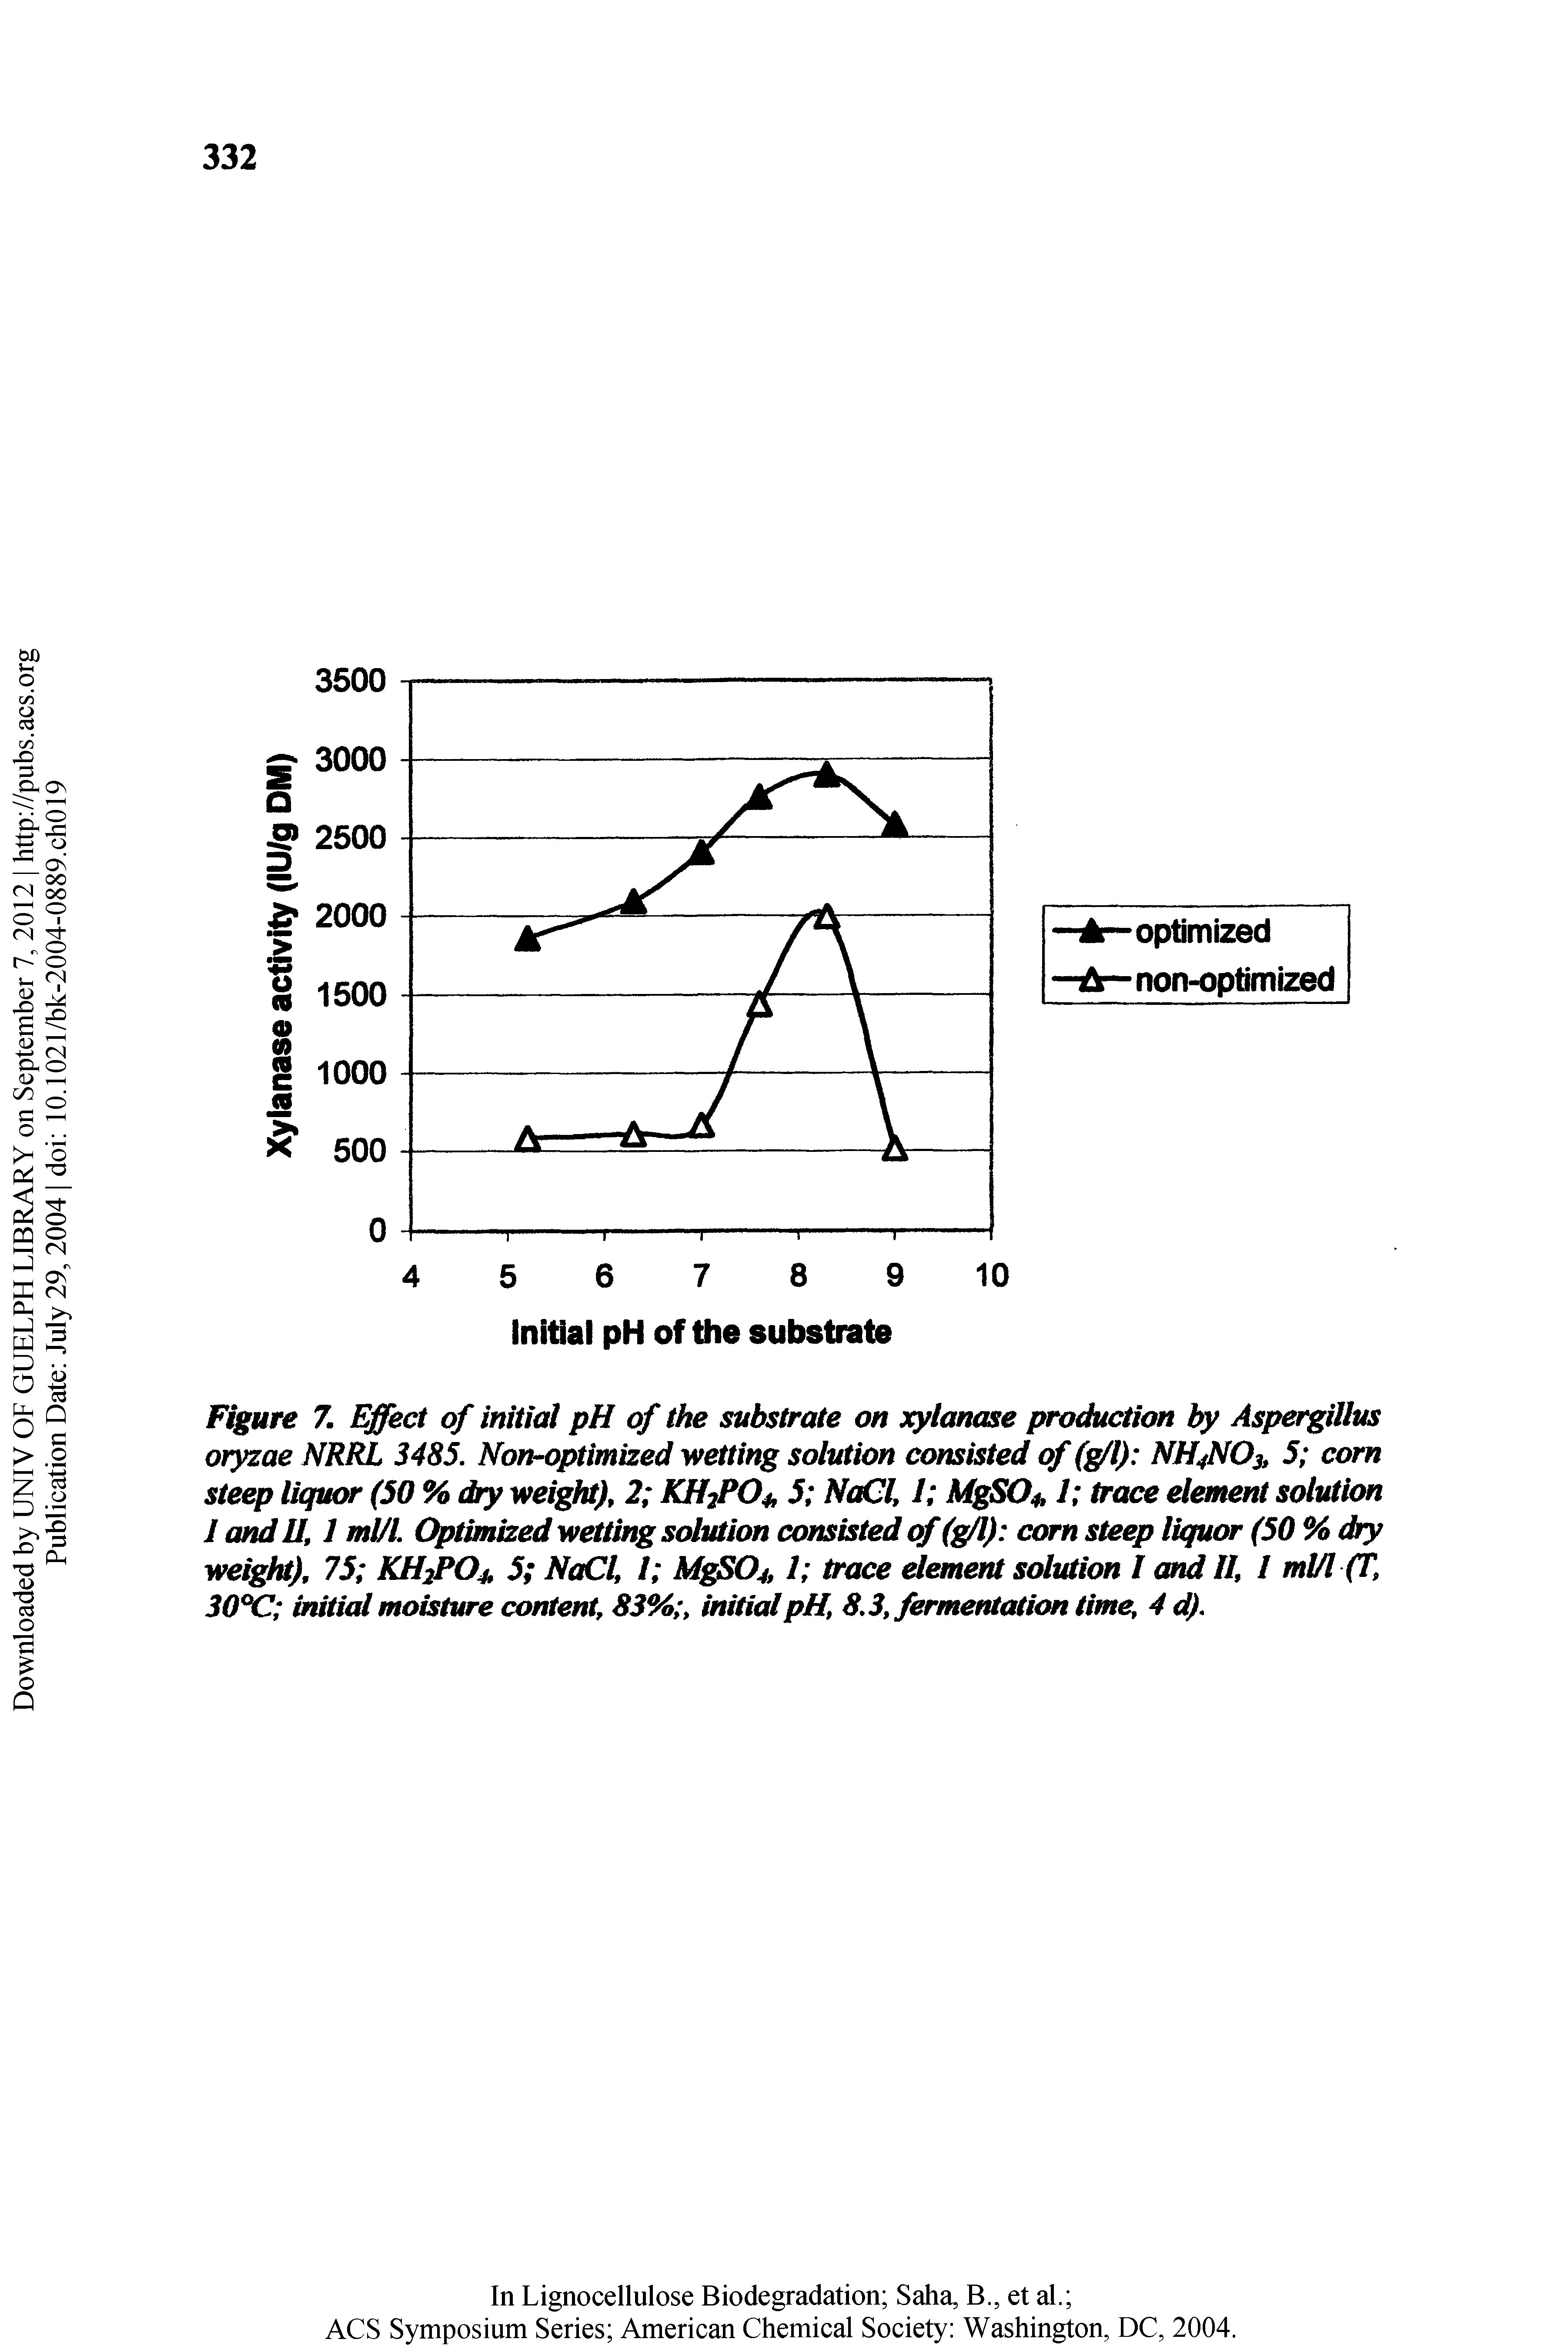 Figure 7. Effect of initial pH of the substrate on xylanase production by Aspergillus oryzae NRRL 3485. Norhoptimized wetting solution consisted of (g/l) NH4NO3, 5 com steep liqwn (50 % dry weight), 2 KH O, 5 NaCl, / MgS04 1 trace element solutim I and II, I ml/L Optimted wetting solution consisted cf (g/l) corn steep liquor (50 % dry yreigld), 75 KH 04, 5 NaCl, I M S 4,1 t ace dement solution I arid II, I mVl (T, 30X mitiai moisture corttent, 83% , initial pH, 8.3, fermentation time, 4 d).